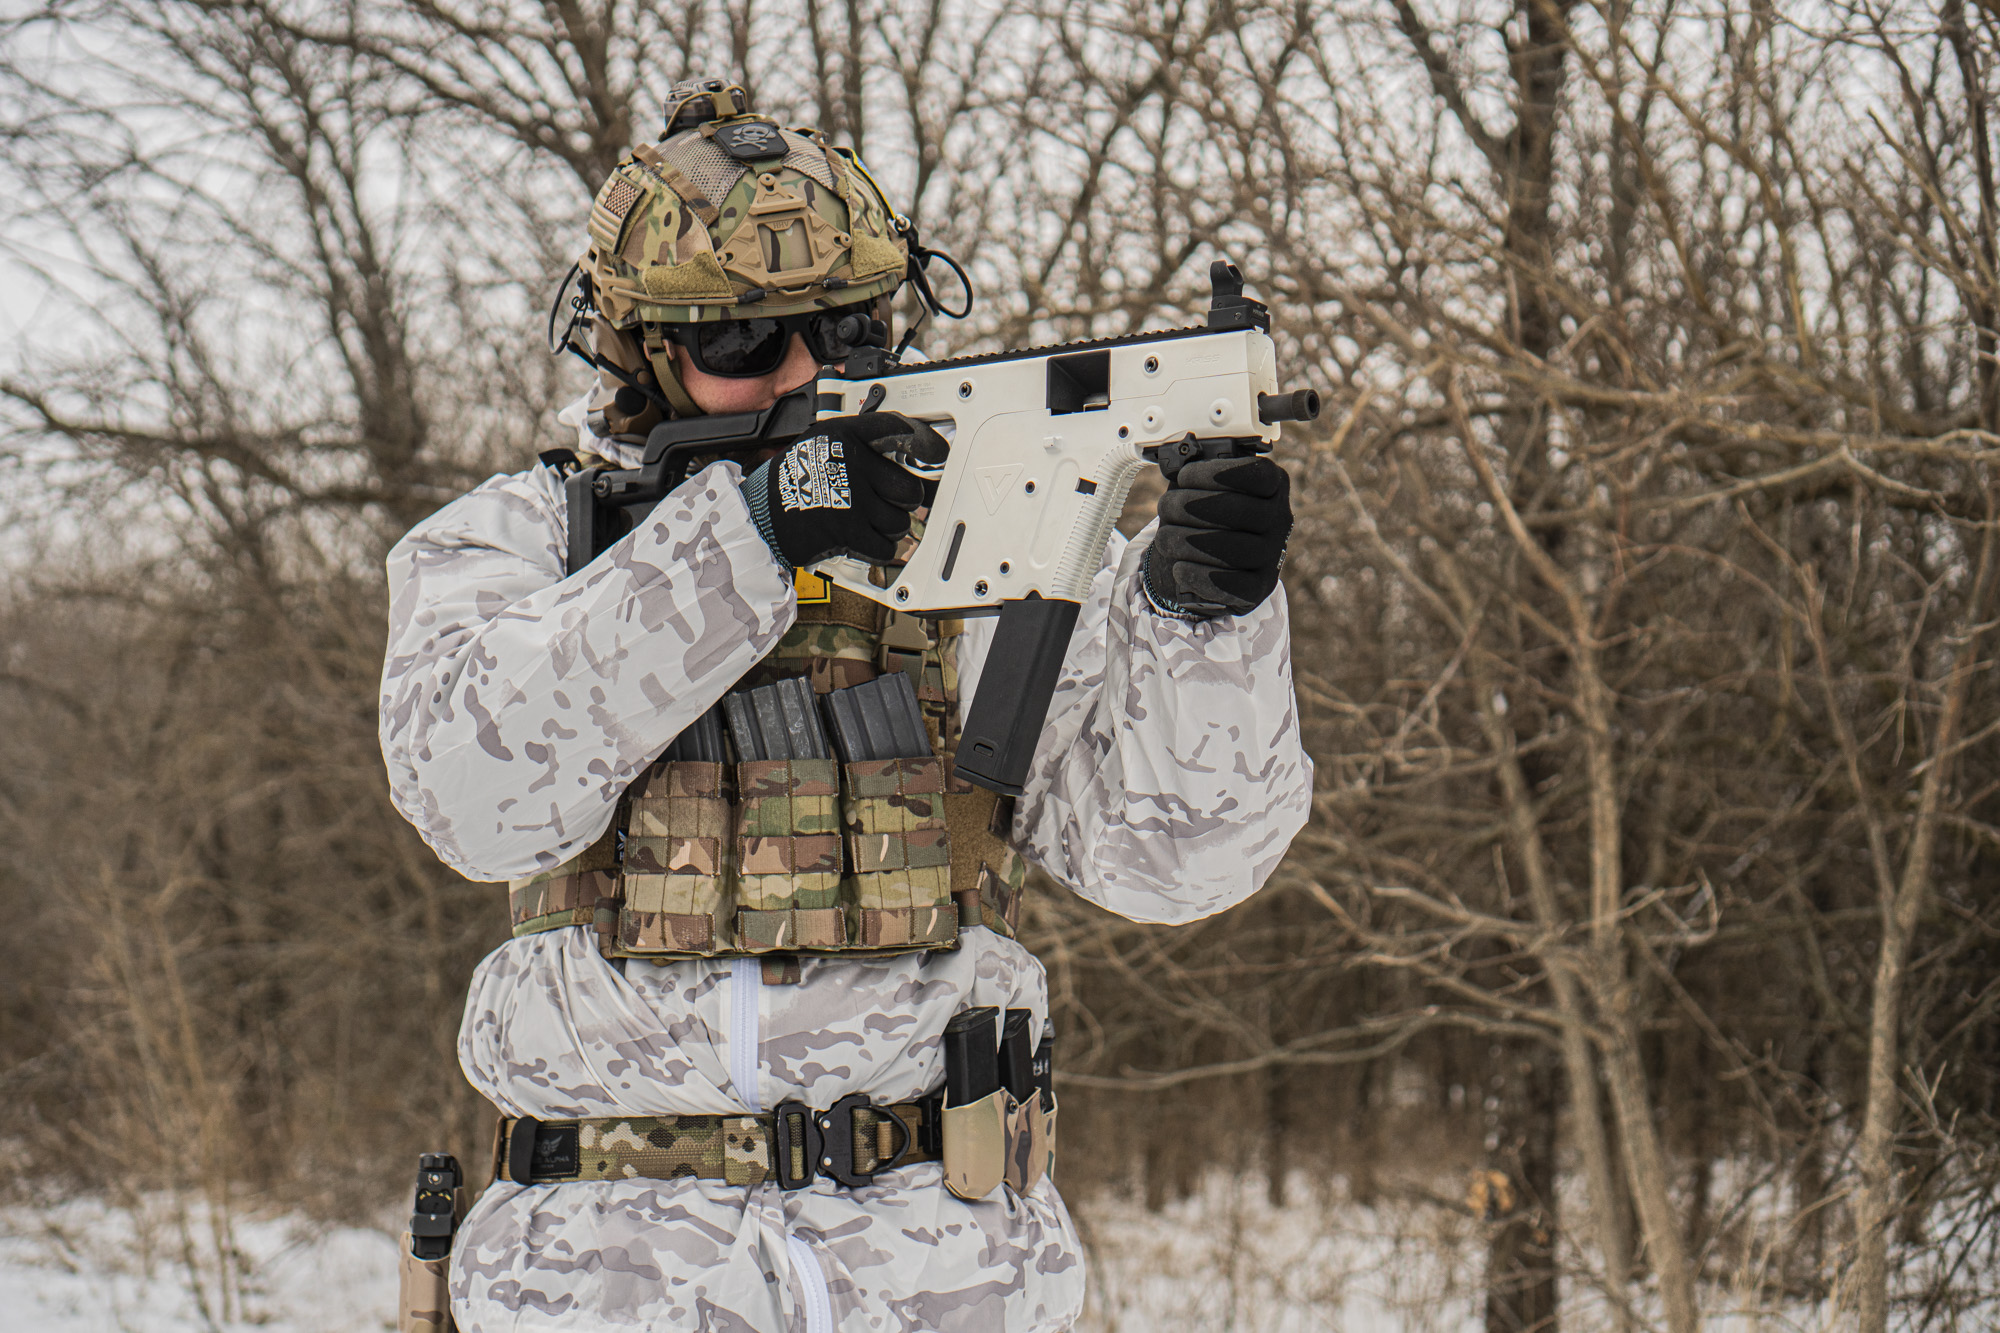 Man in the snow wearing military gear and shooting white KRISS Vector